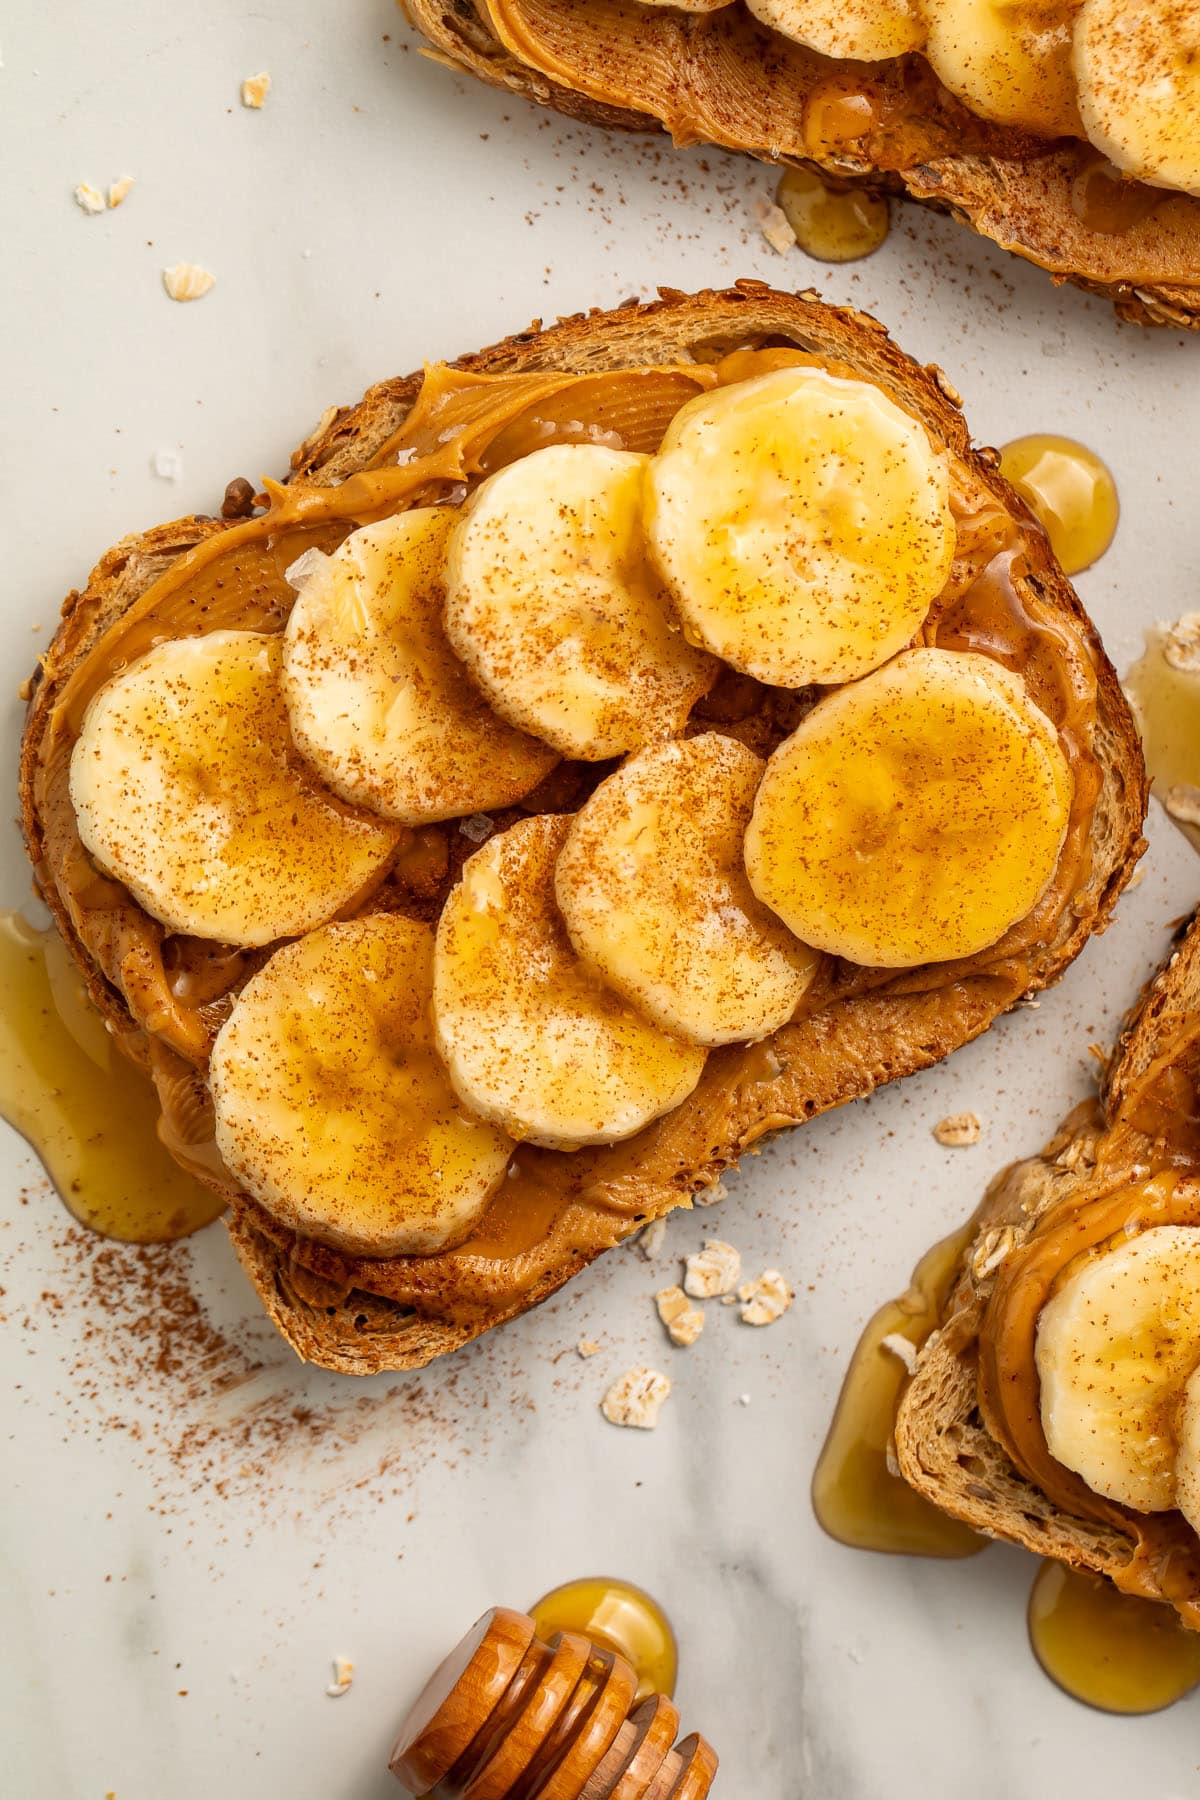 Close-up view of a slice of peanut butter banana toast topped with honey, cinnamon, and sea salt.